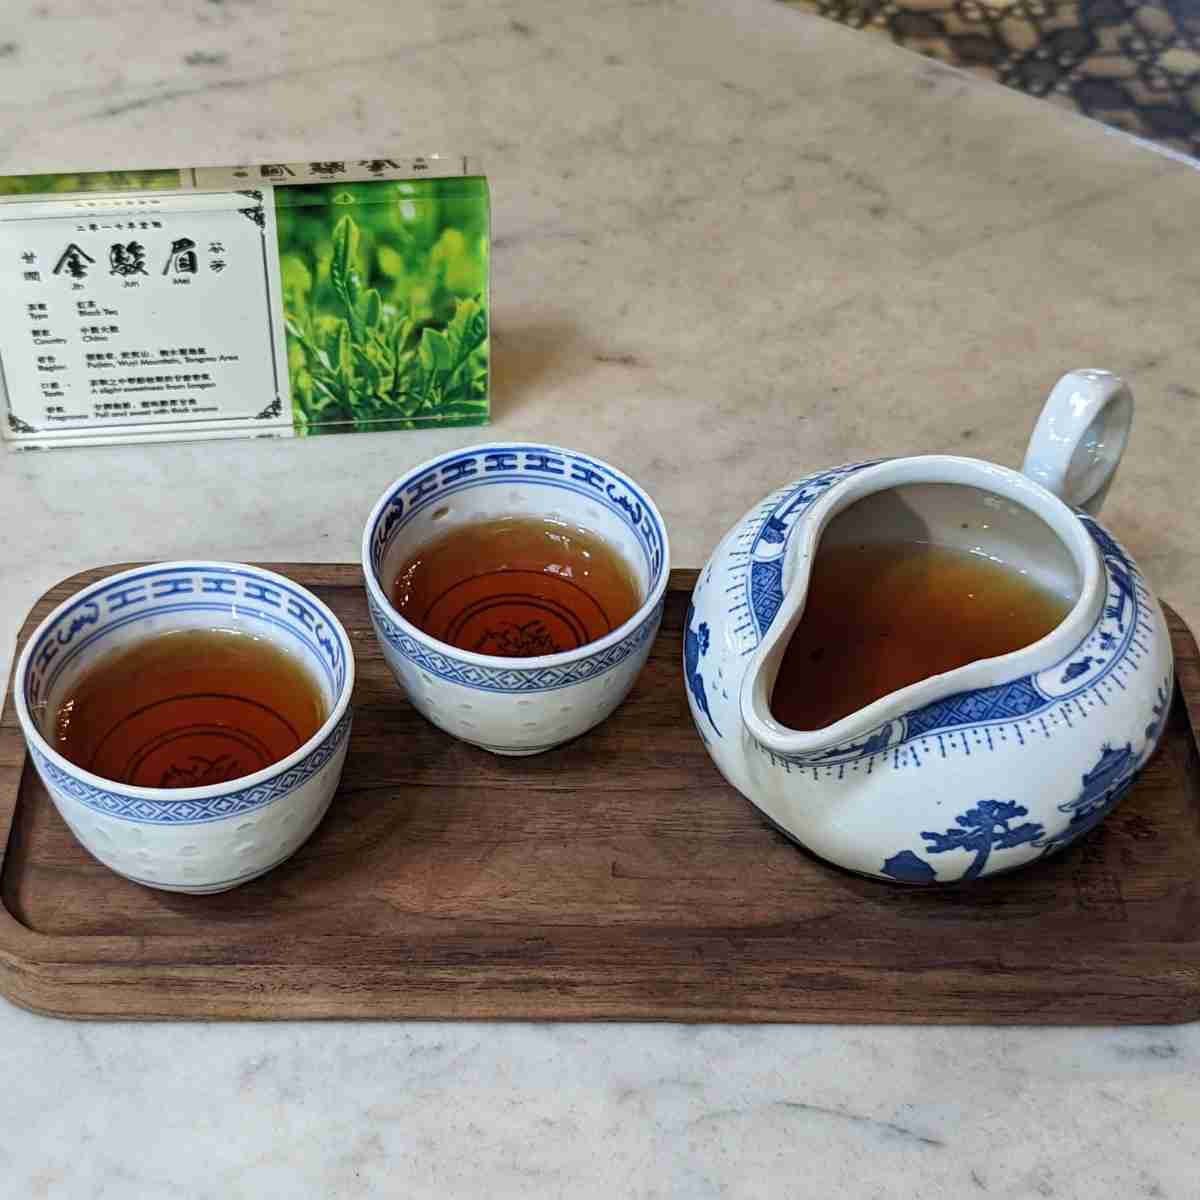 chinese tea for cantonese meal